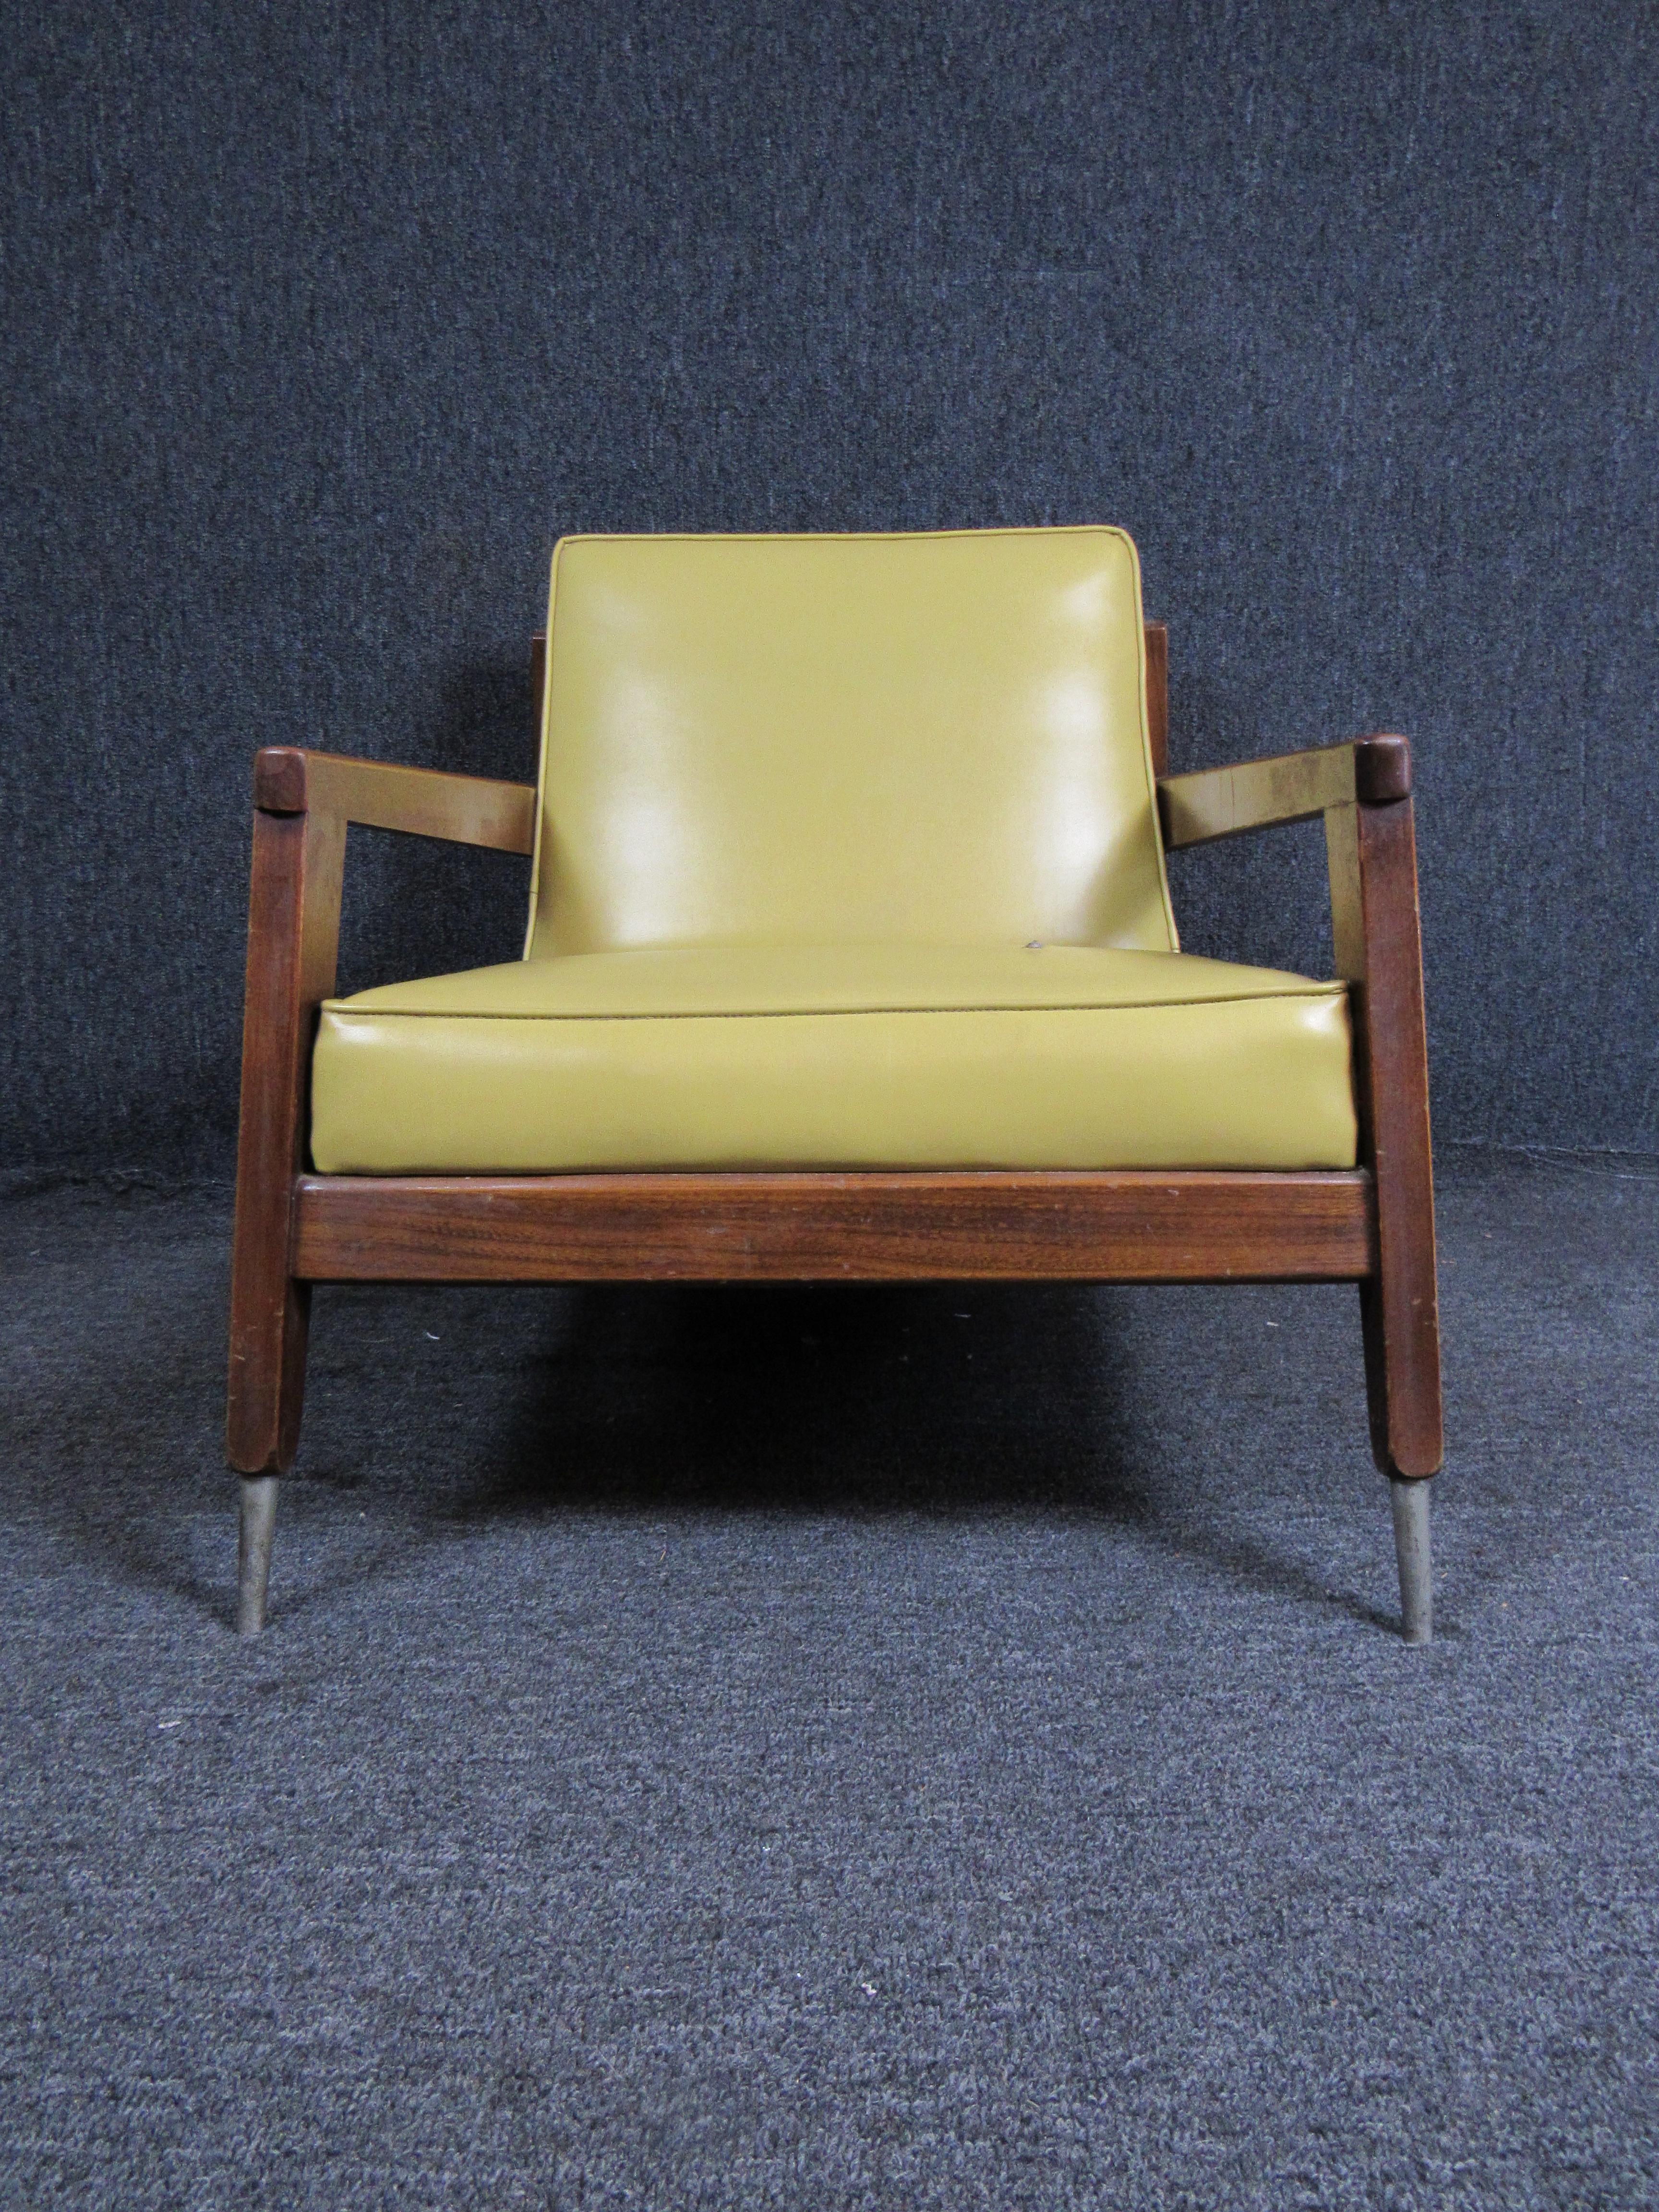 Bring home Classic Mid-Century Modern style with this bold vintage armchair. A sharp walnut frame contrasts perfectly with the retro mustard vinyl covering. An authentic, subtle patina completes the look. Perfect for the home or office. Please